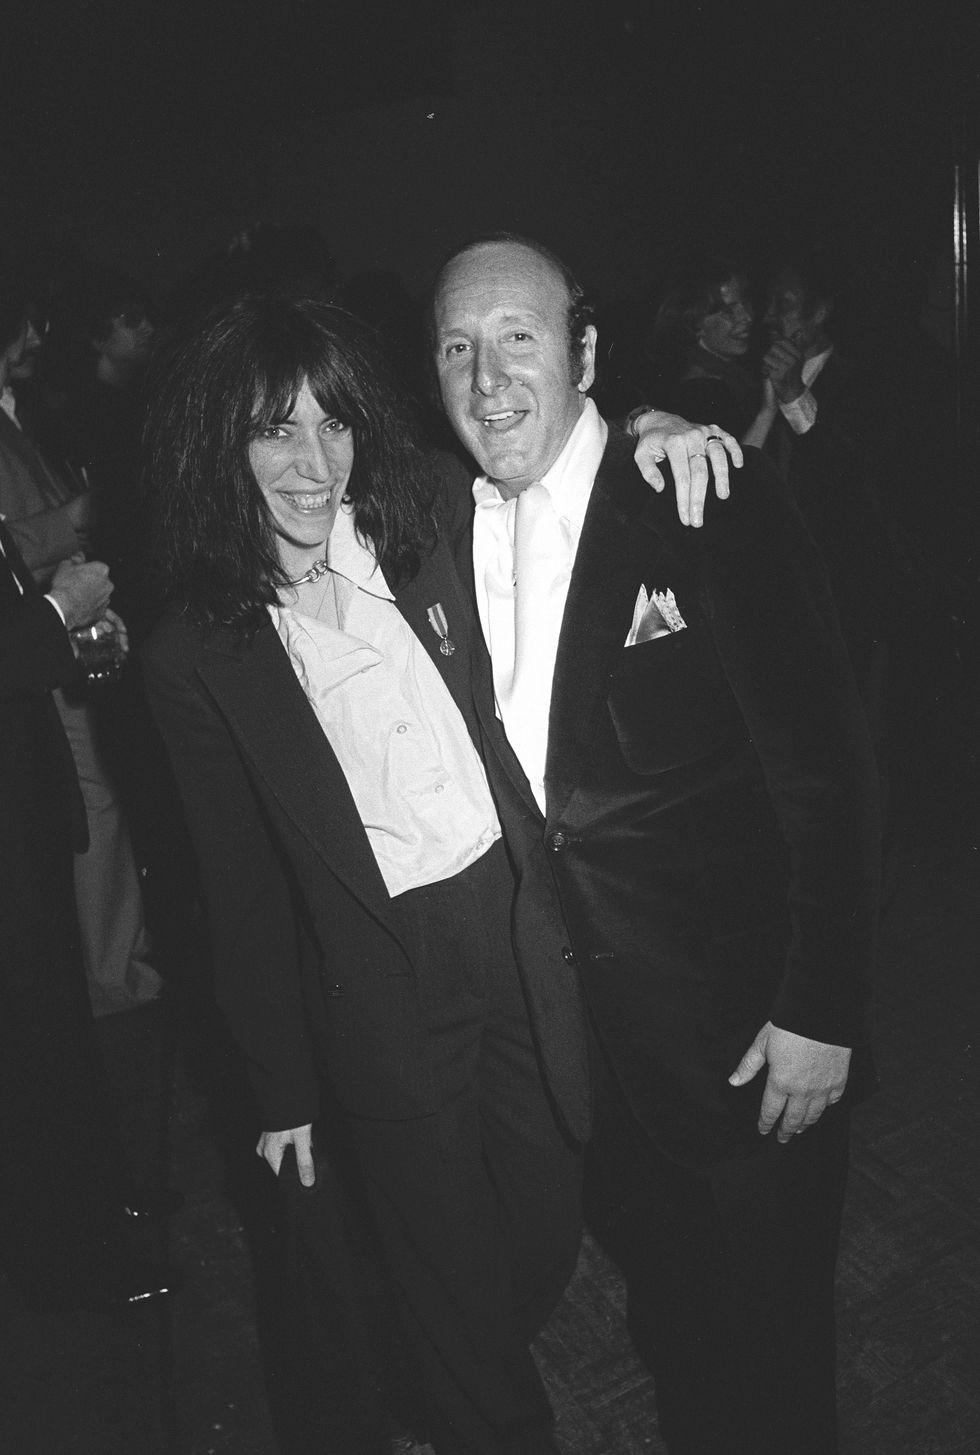 Studio 54's Cast List: A Who's Who of the 1970s Nightlife Circuit